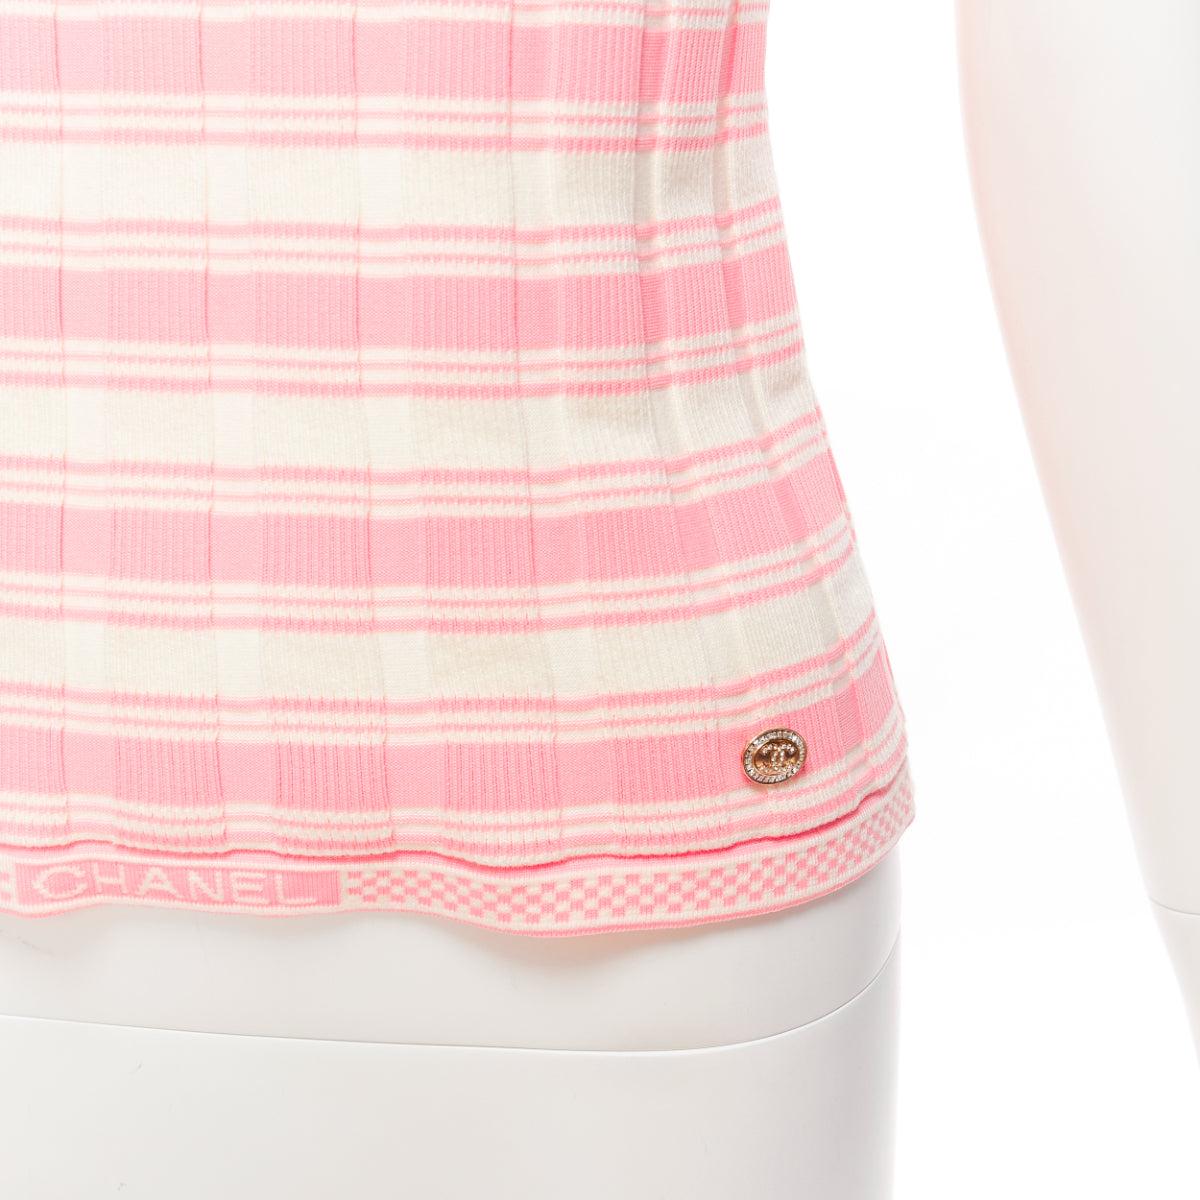 CHANEL 23C white pink stripe logo charm short sleeve ribbed sweater FR40 L
Reference: KYCG/A00003
Brand: Chanel
Designer: Virginie Viard
Collection: 23C
Material: Cotton, Blend
Color: Pink, White
Pattern: Striped
Closure: Pullover
Extra Details: